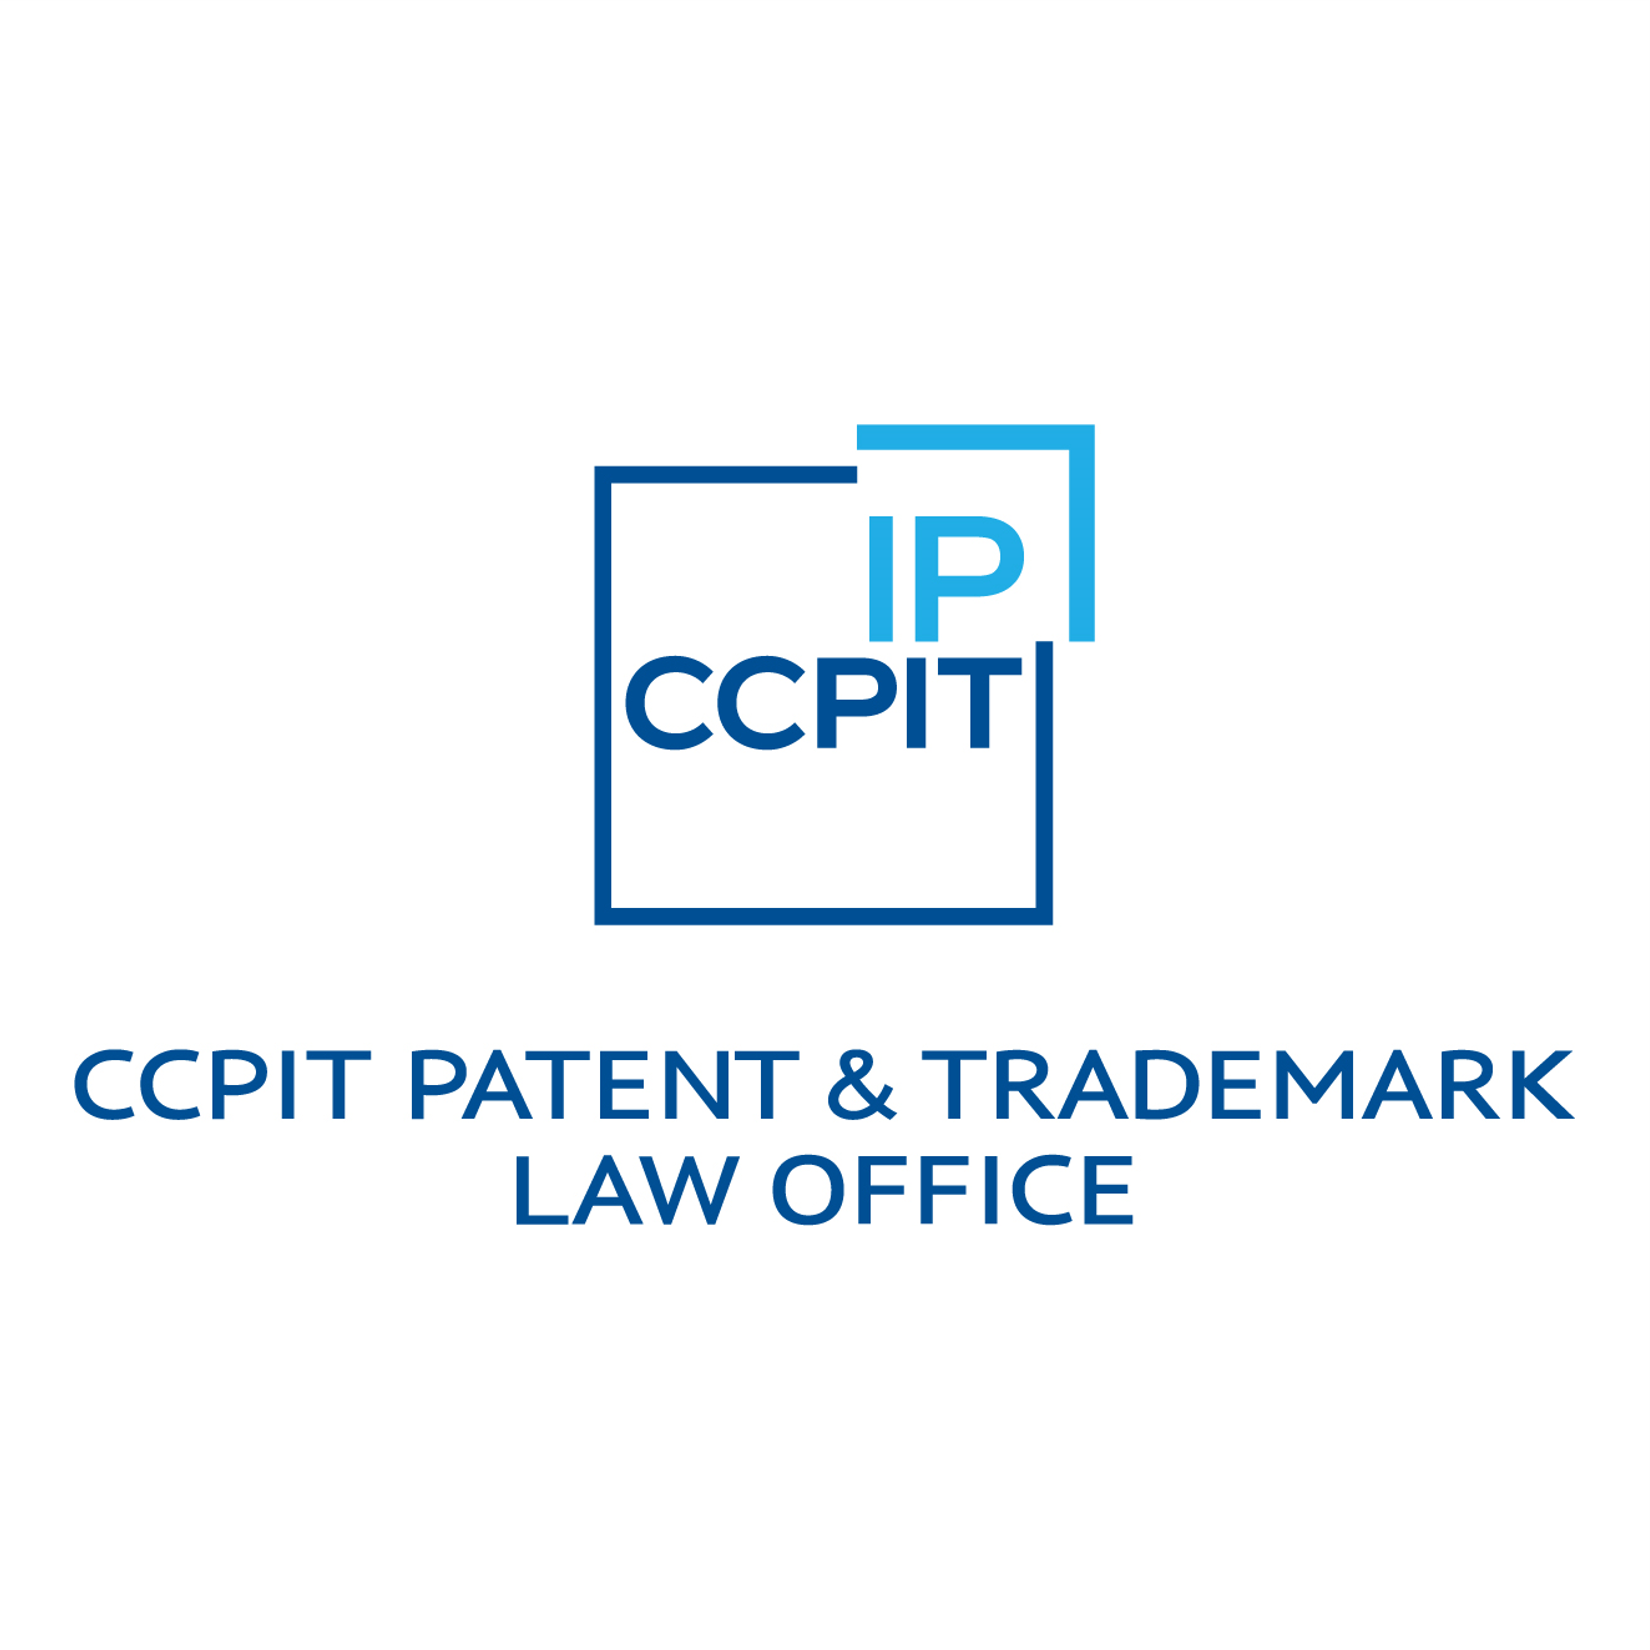 CCPIT Patent and Trademark Law Office